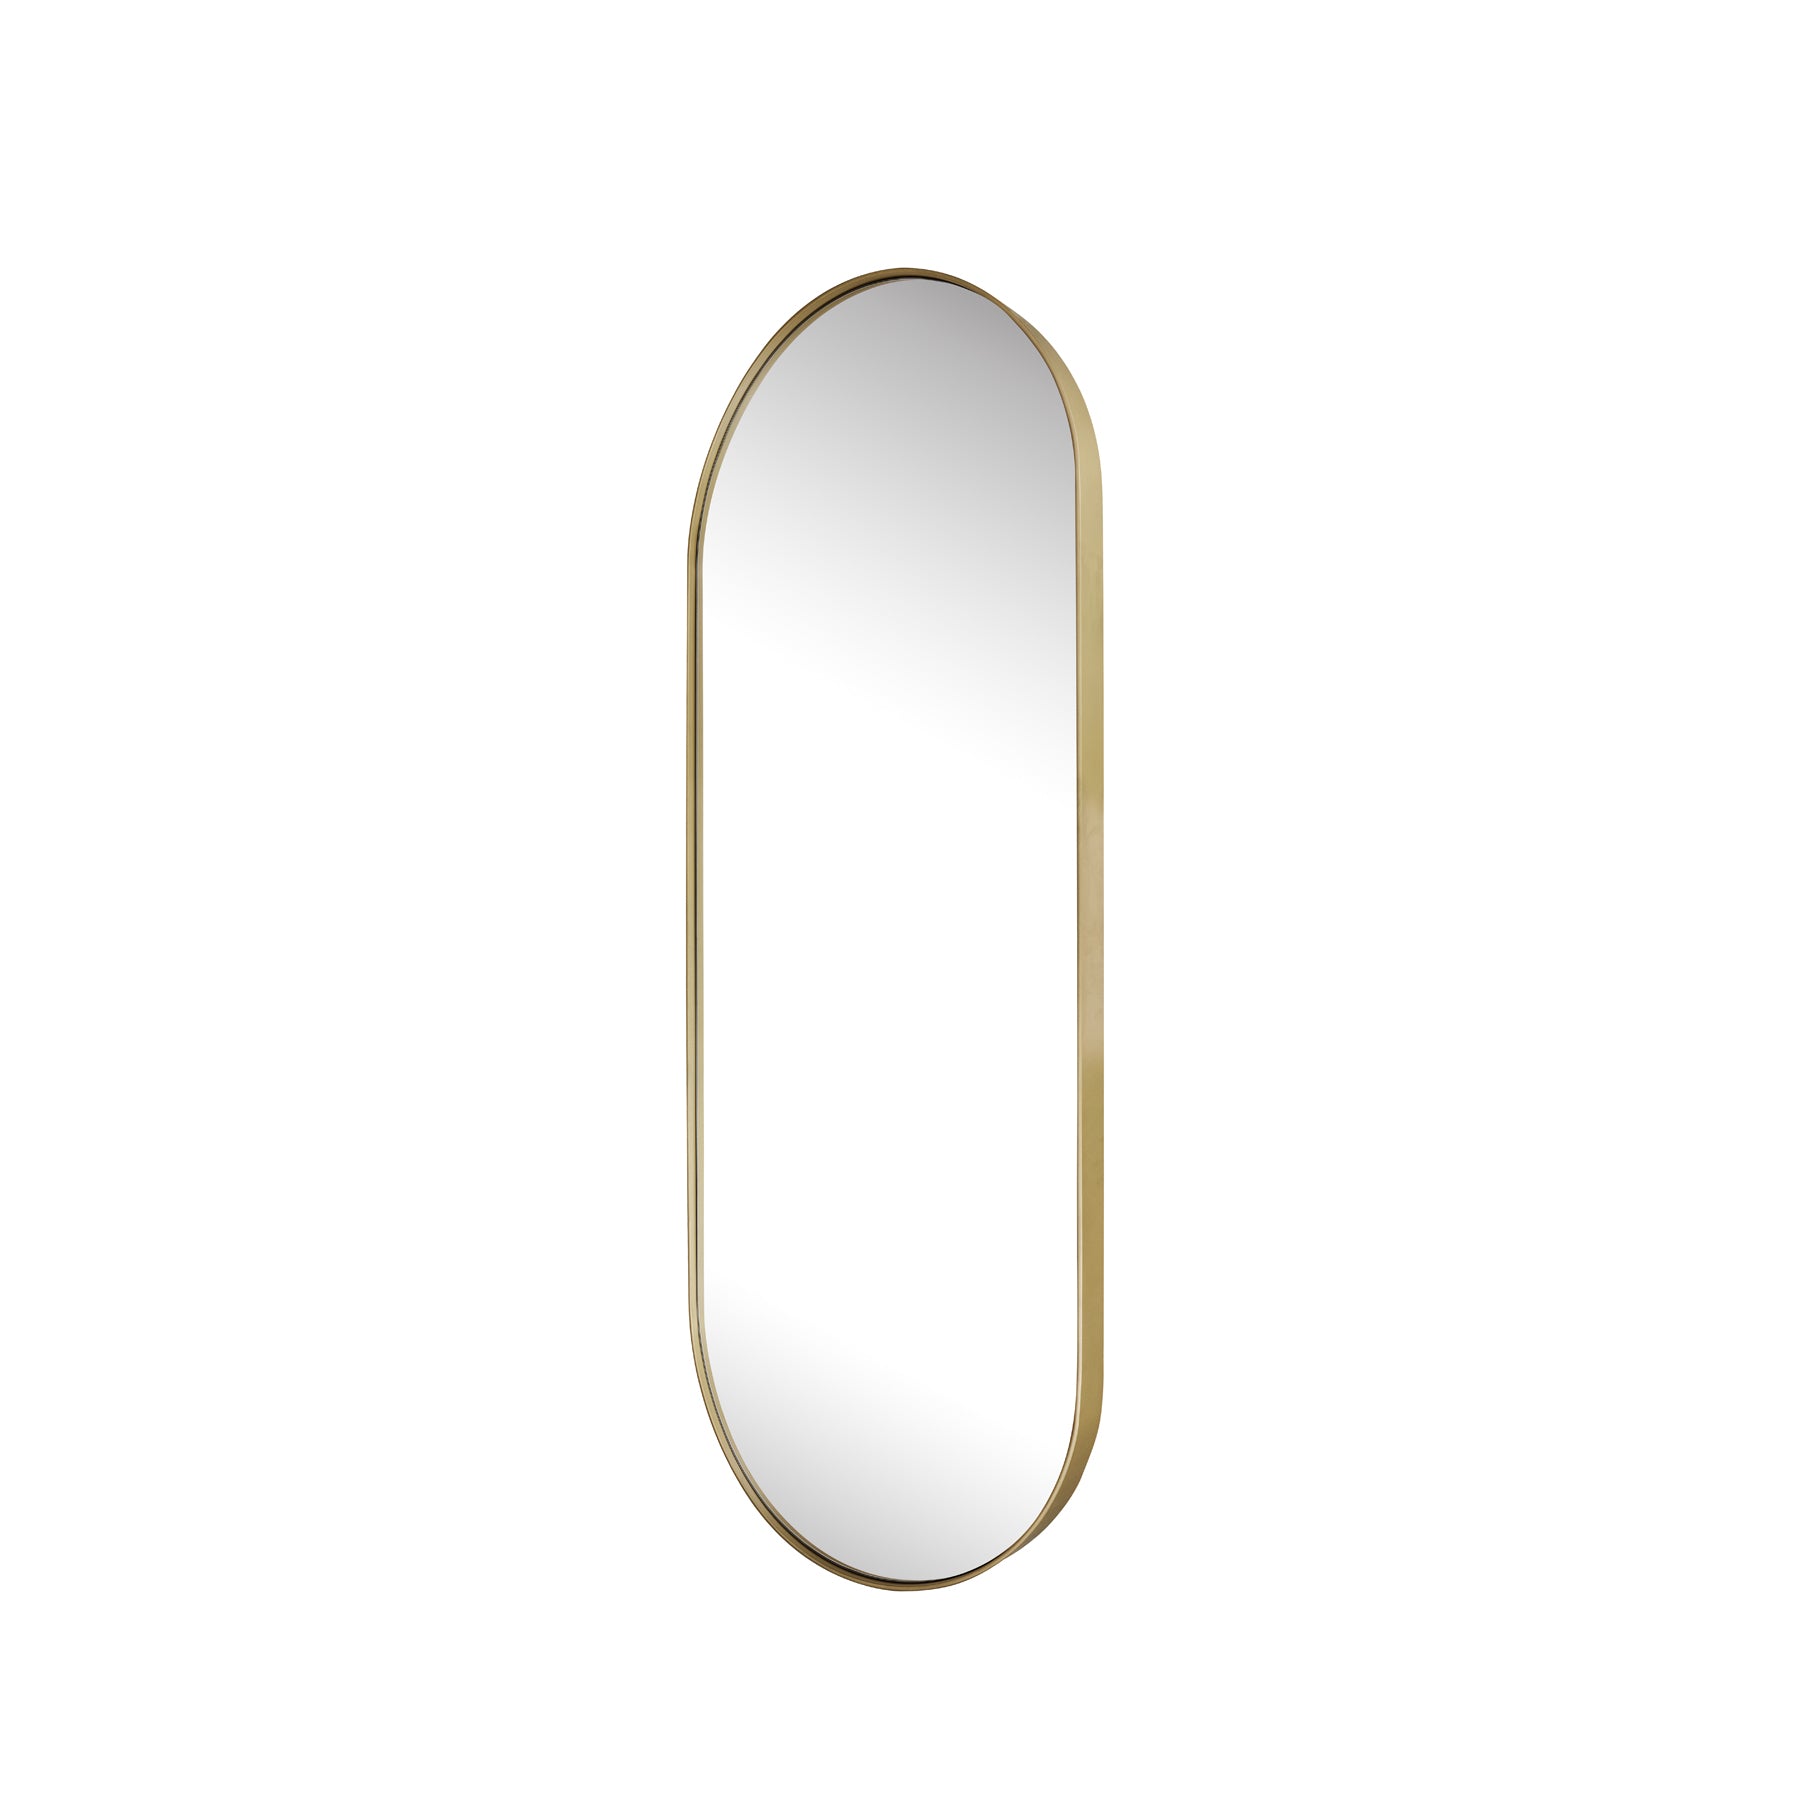 Ovoid - Gold Finish - Paramount Mirrors and Prints